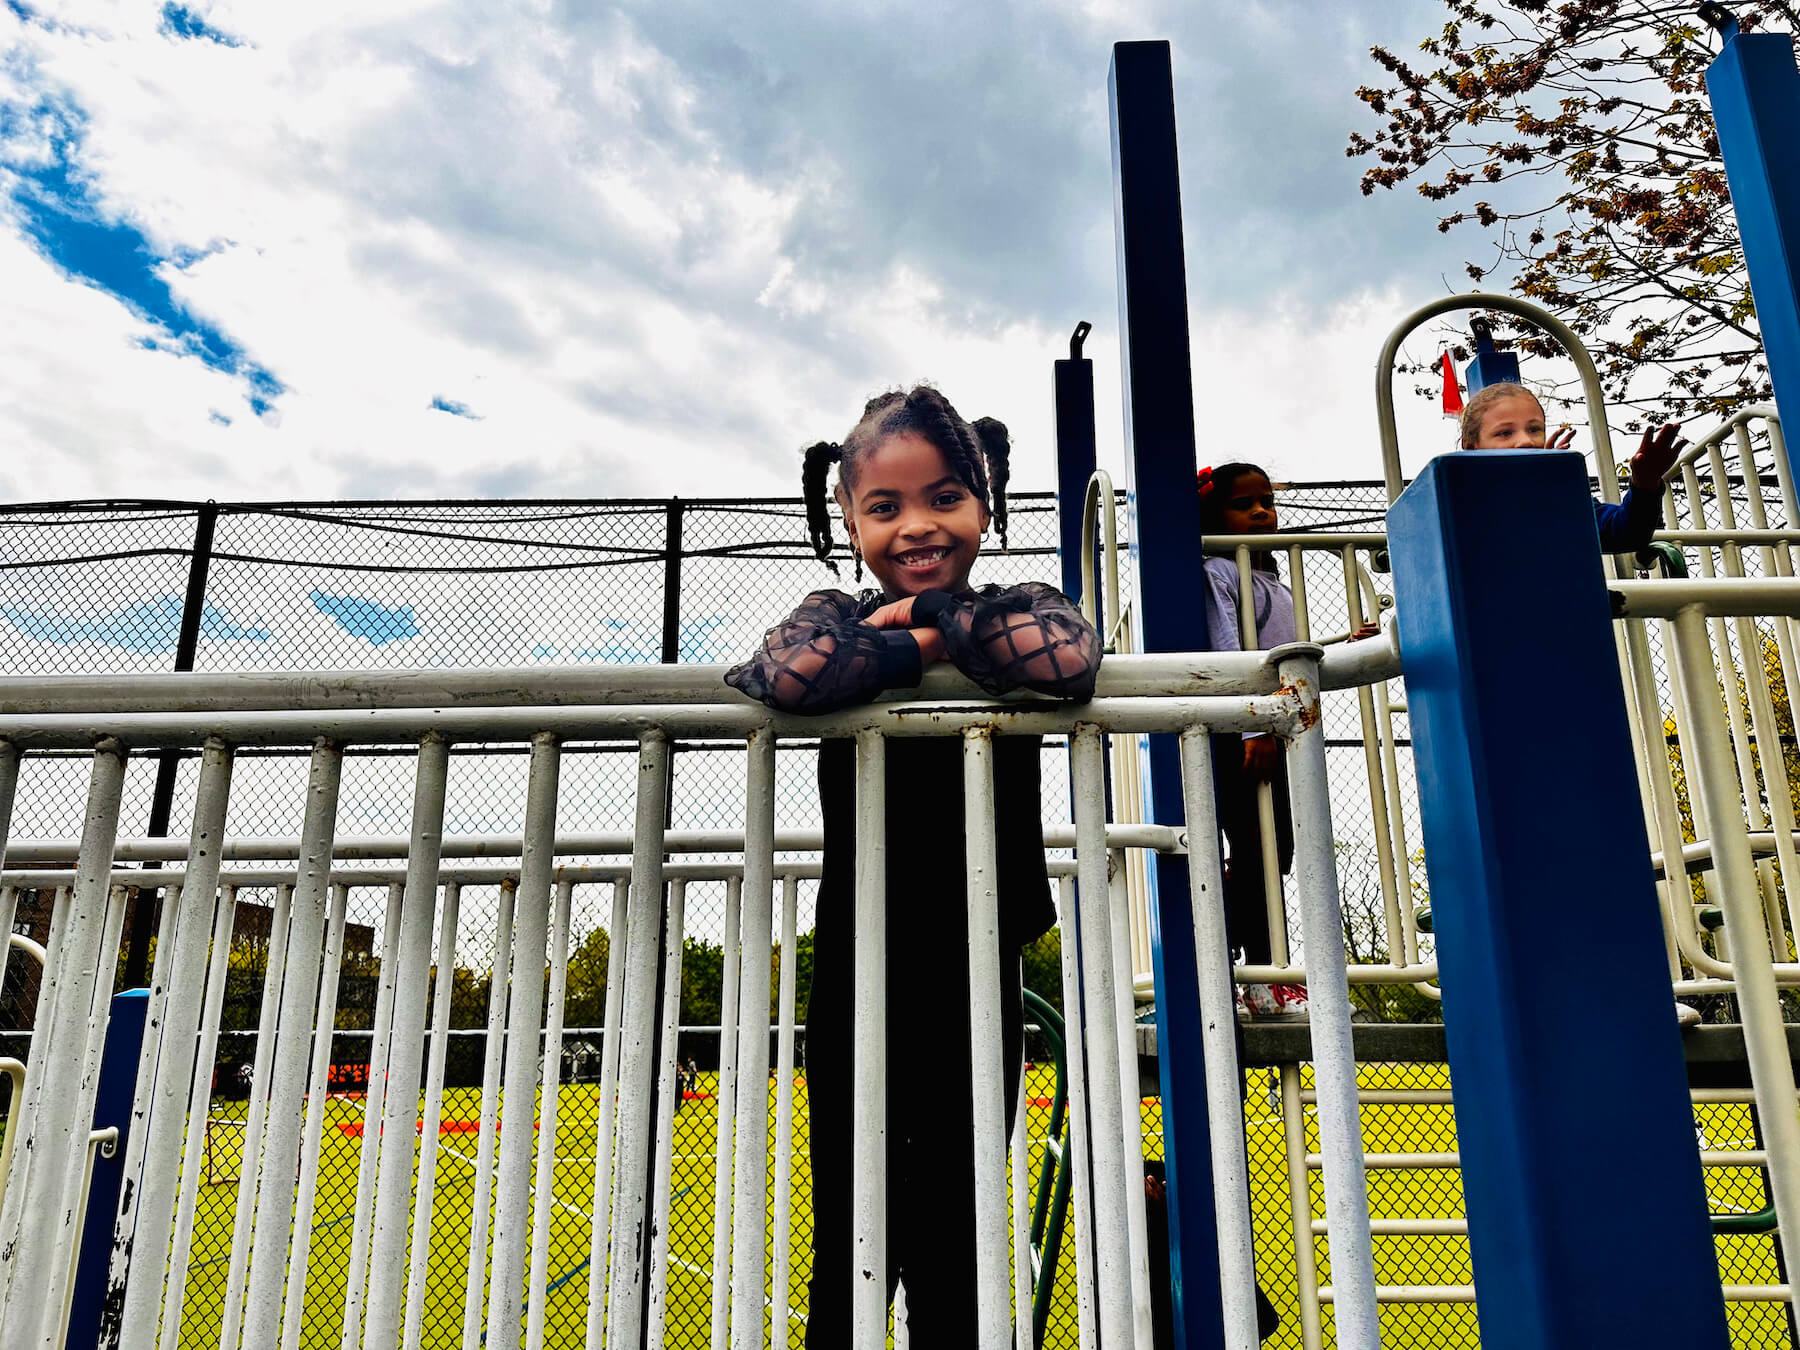 An Ethical Culture Fieldston School Fieldston Lower student plays on the playground